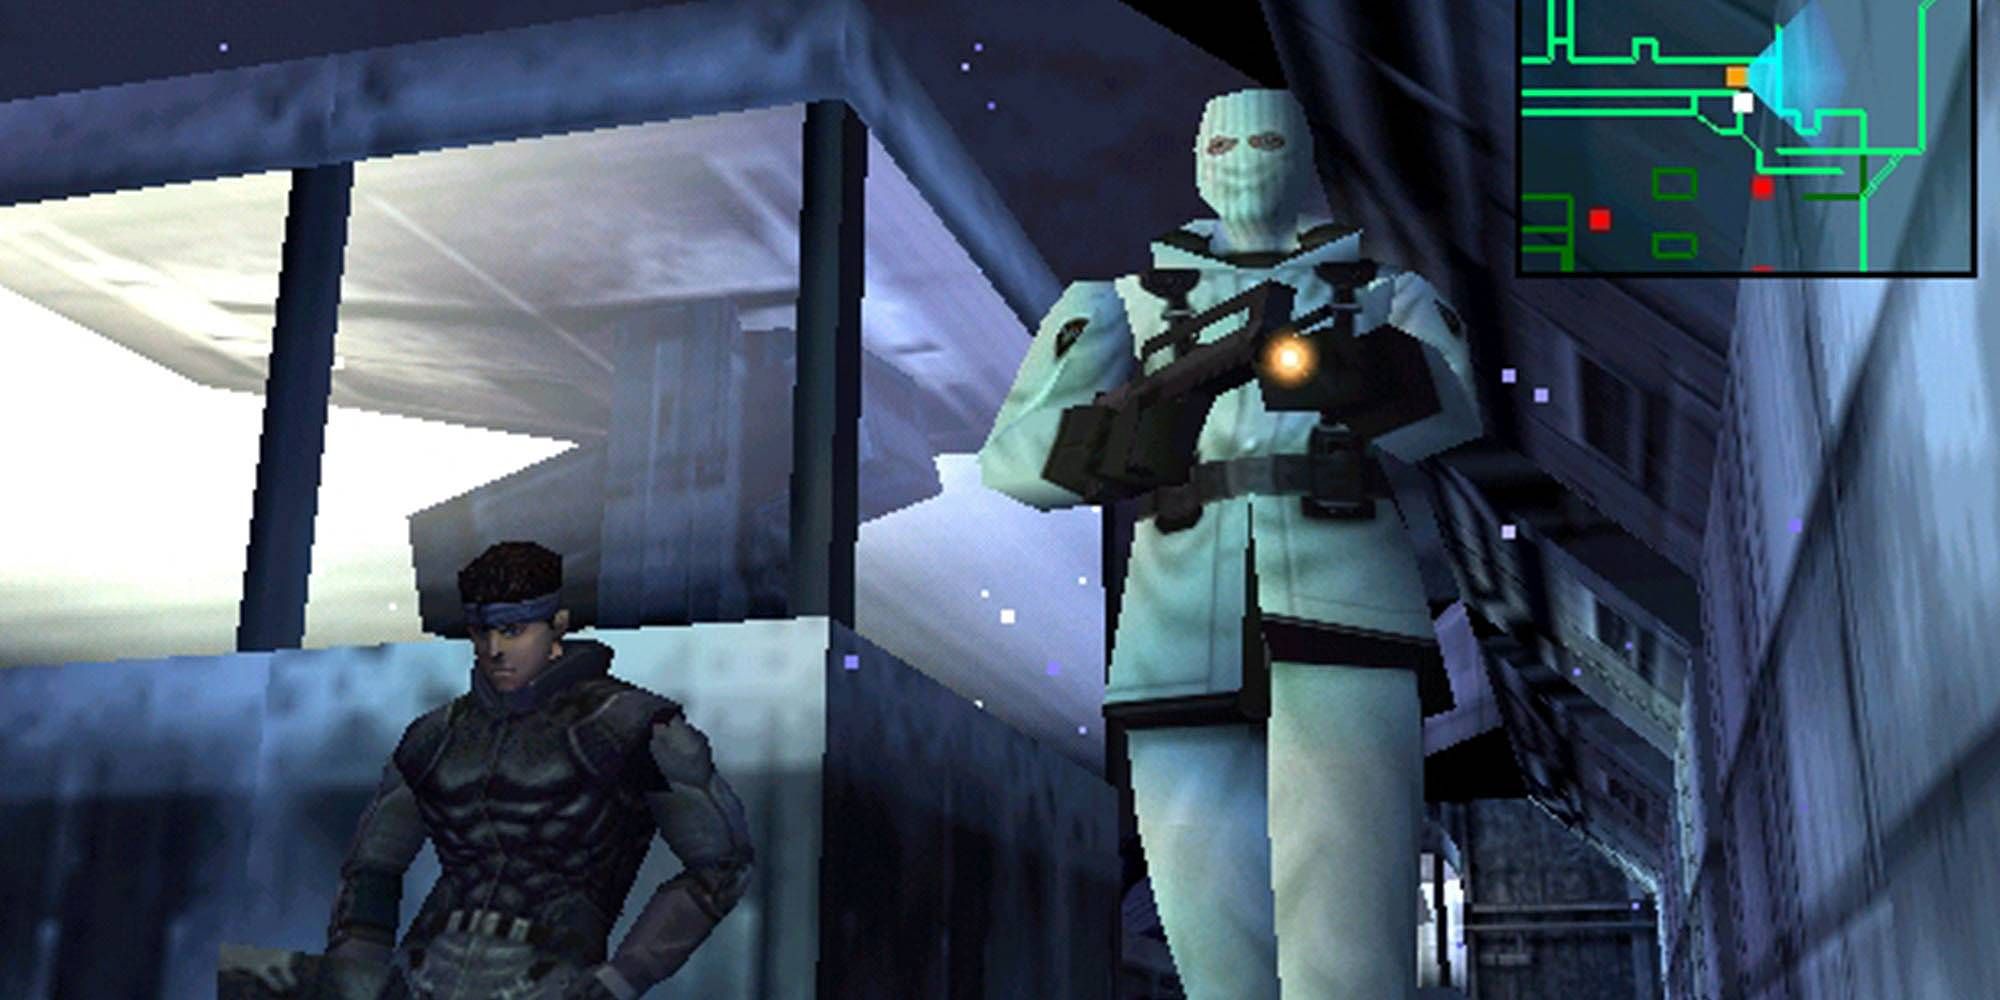 A figure dressed in black crouches as a man walks by with a weapon in a snowy environment in Metal Gear Solid 1